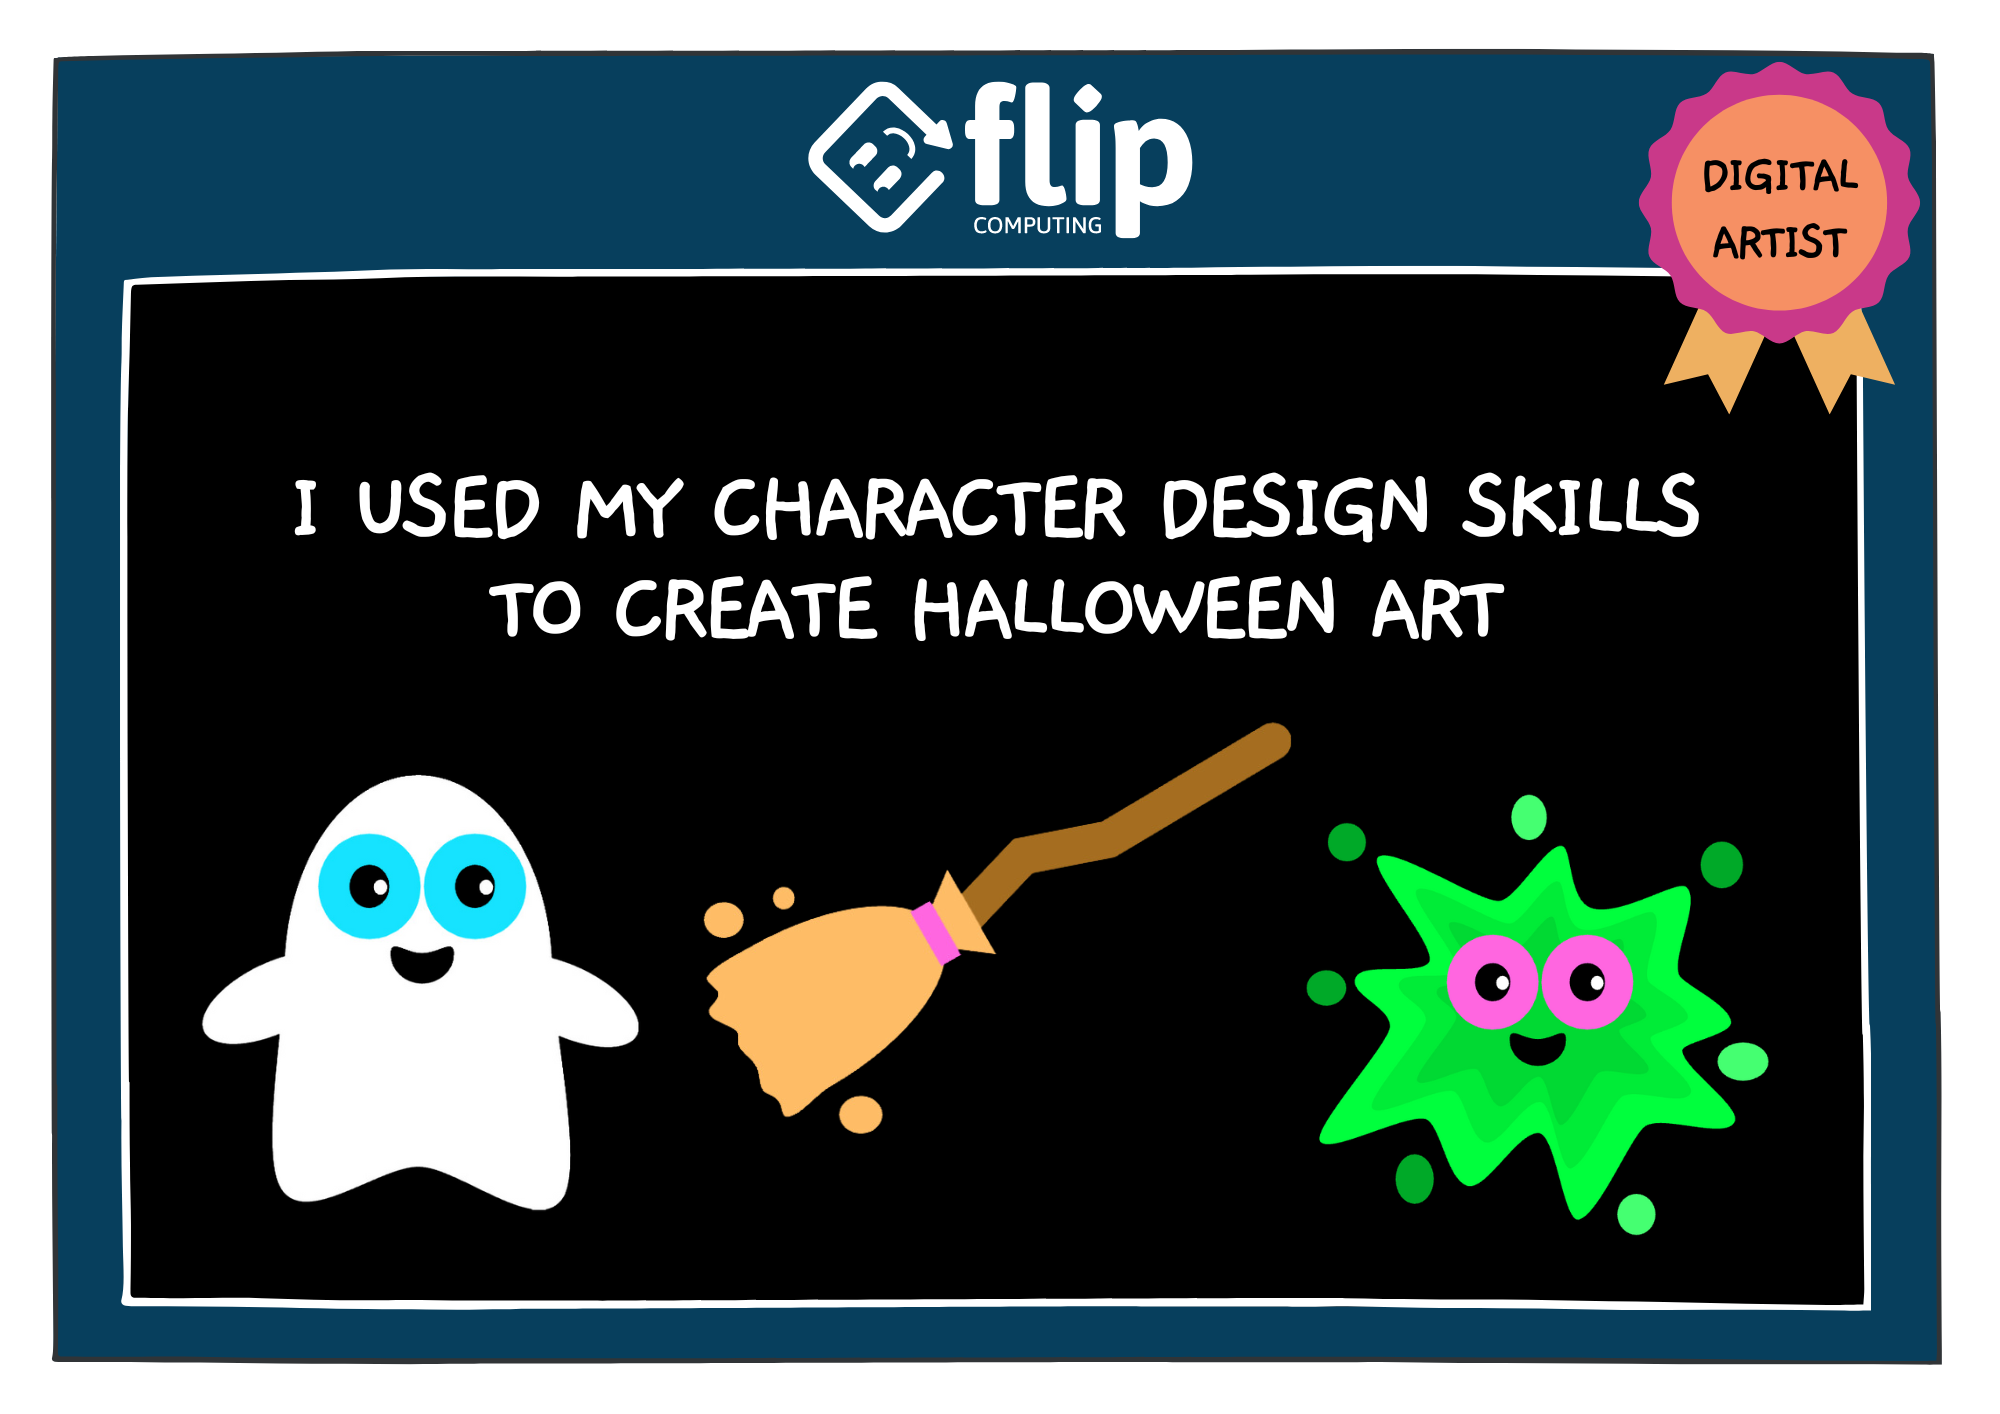 A graphic of a certificate. It has a blue border with the Flip Computing logo at the top. There is a rosette with the words 'Digital Artist'. The text on the certificate reads 'I used my character design skills to create halloween art'. There is a cartoon ghost, broomstick, and slime.